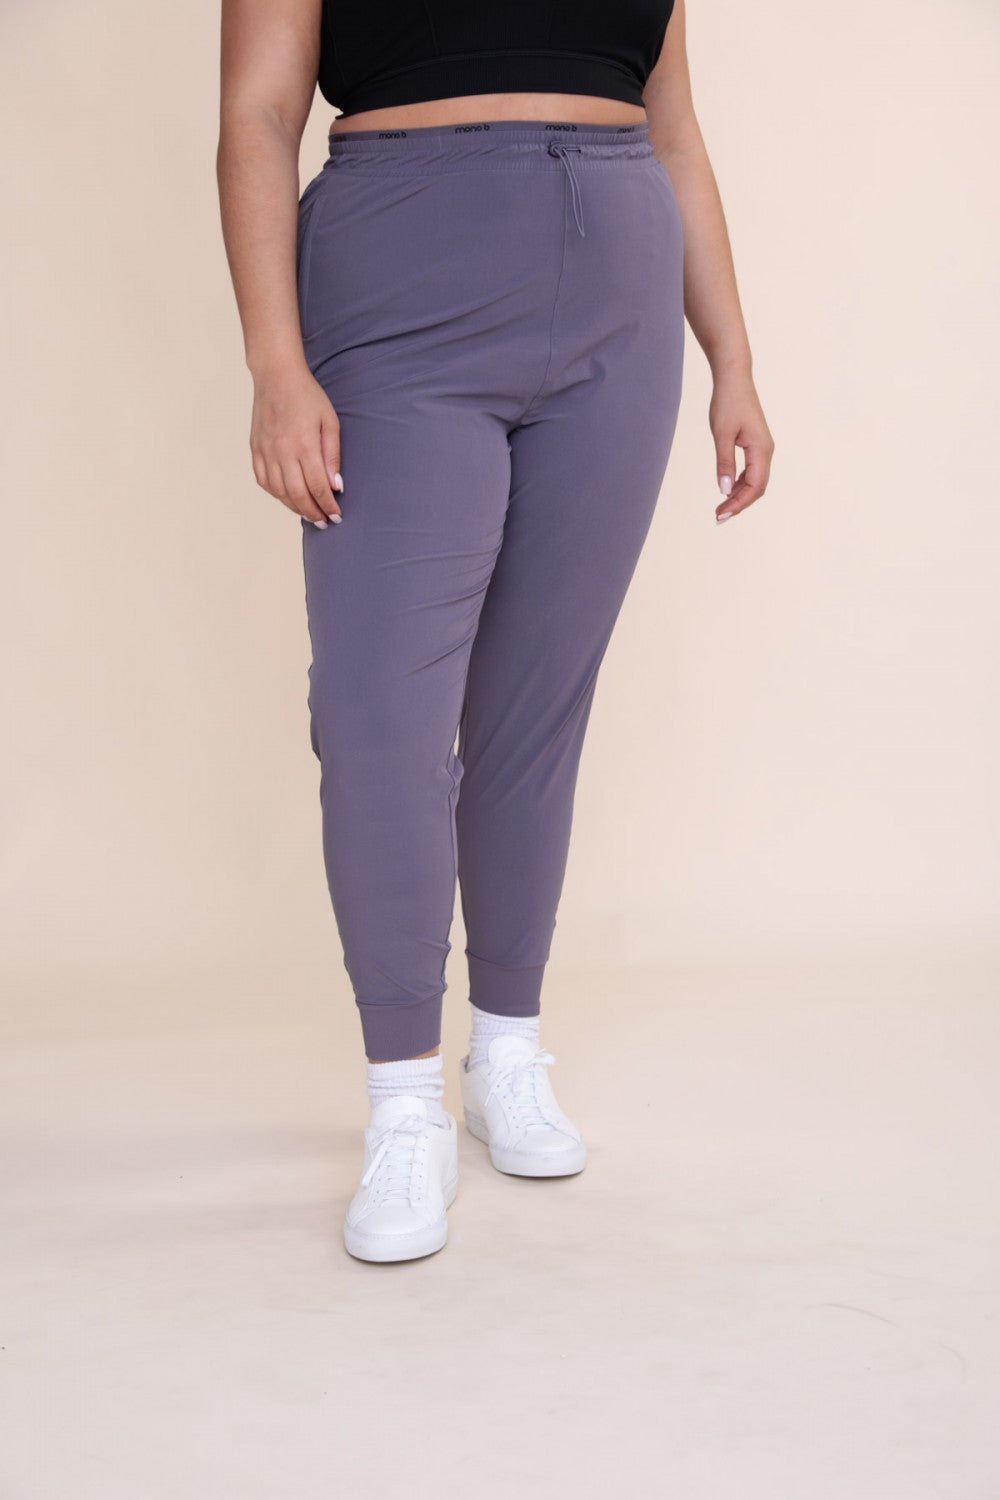 Womens Branded Waistband Toggle Joggers - AP-A1066P